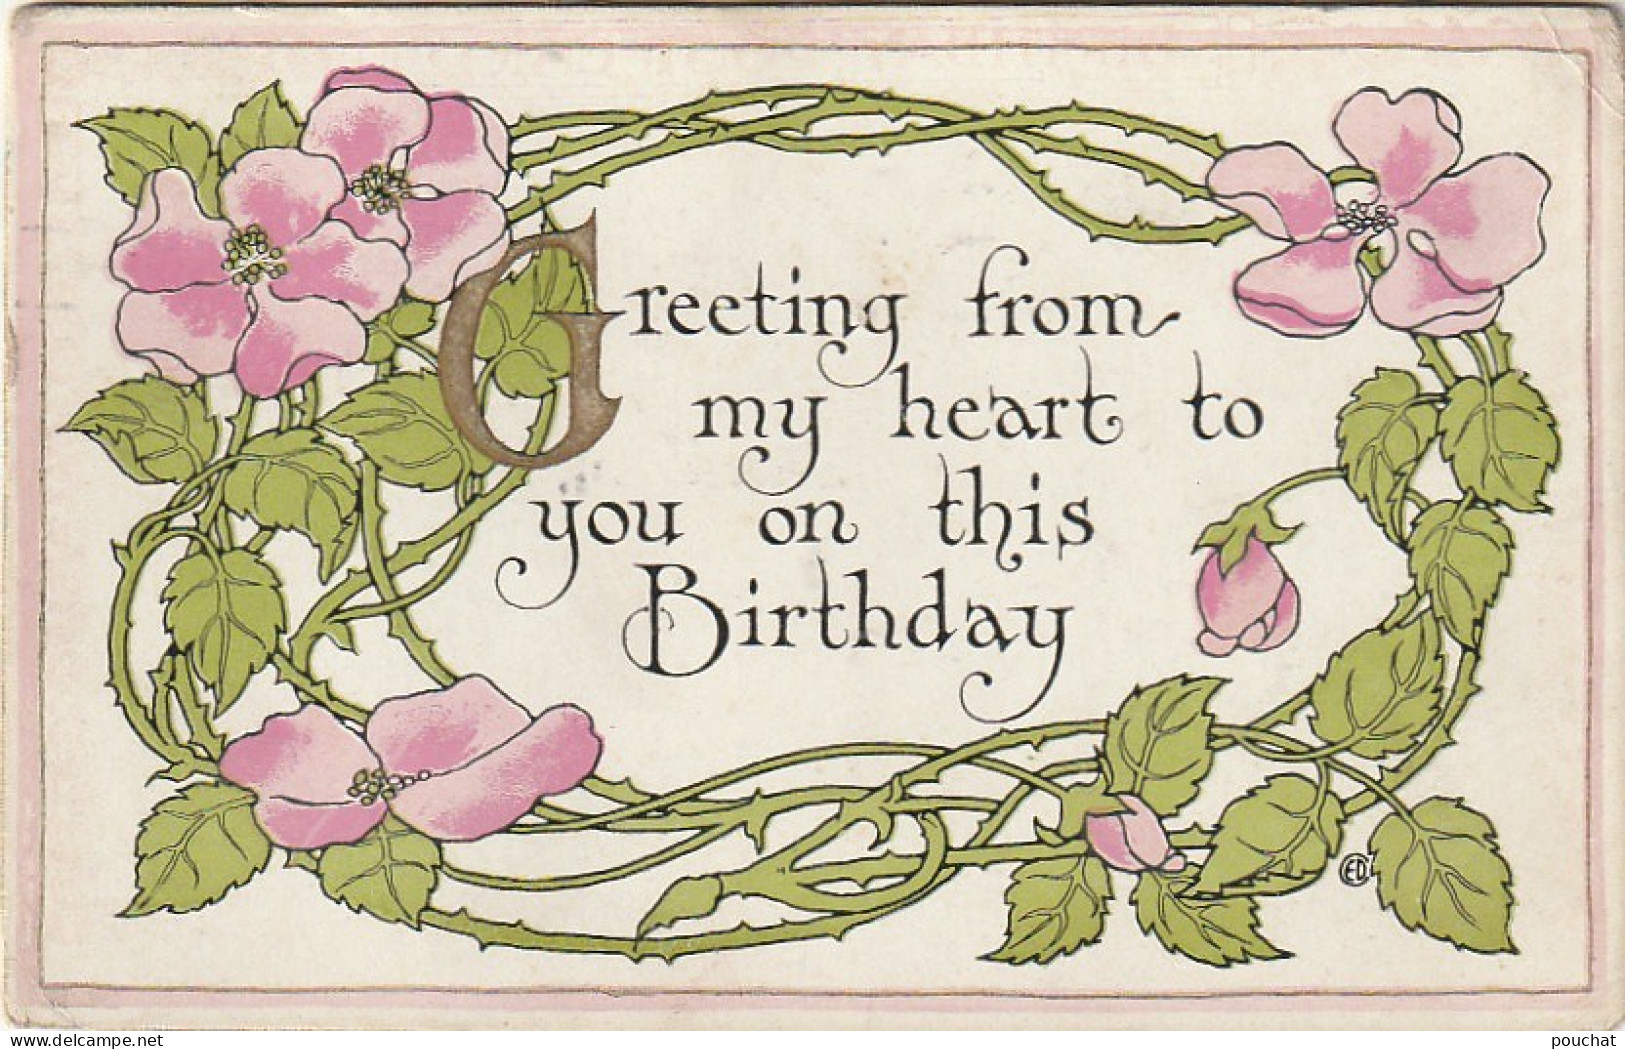 Z+ 6- " GREETING .. TO YOU ON THIS BIRTHDAY " - CARTE ANNIVERSAIRE  FANTAISIE - TIGES DE ROSES ENCHEVETREES  - 2 SCANS - Cumpleaños